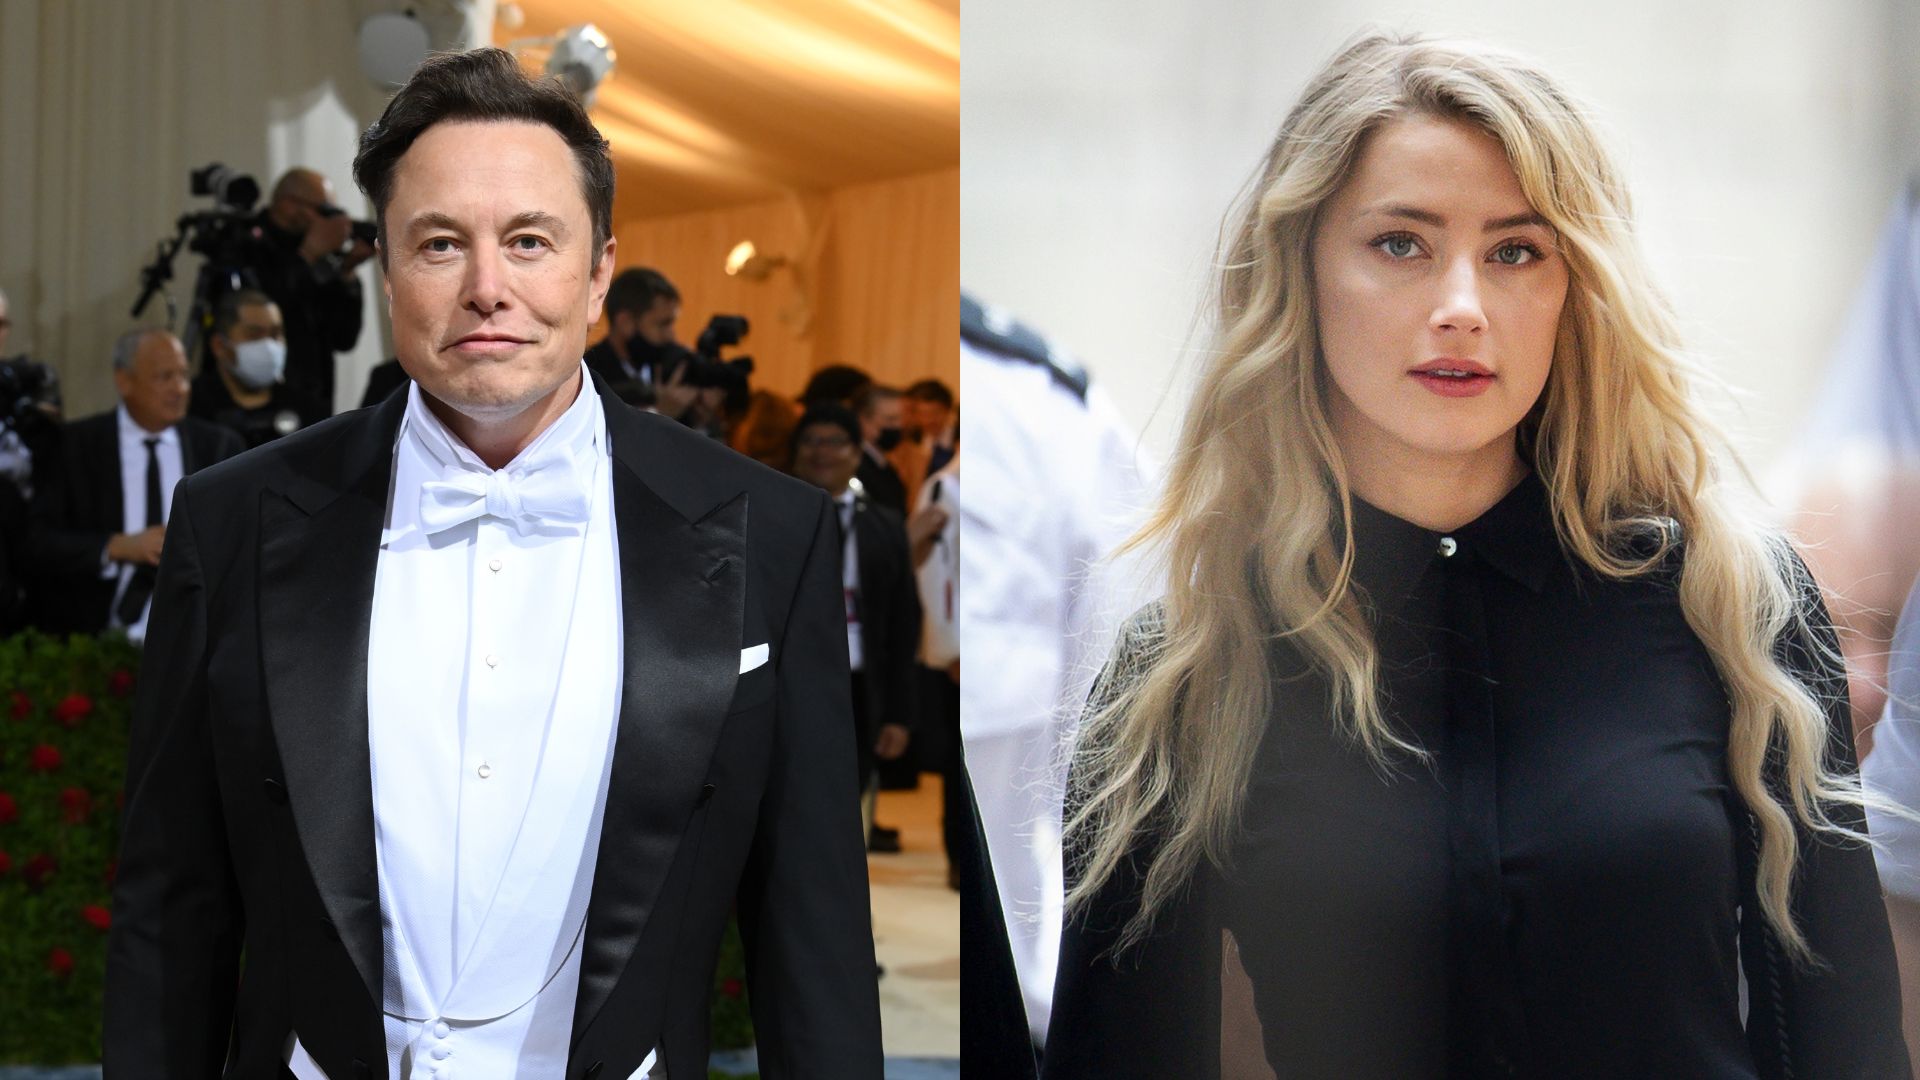 Amber Heard is said to have become upset with Elon Musk after his businessman posted a photo of her wearing a sexy outfit, the website reported.